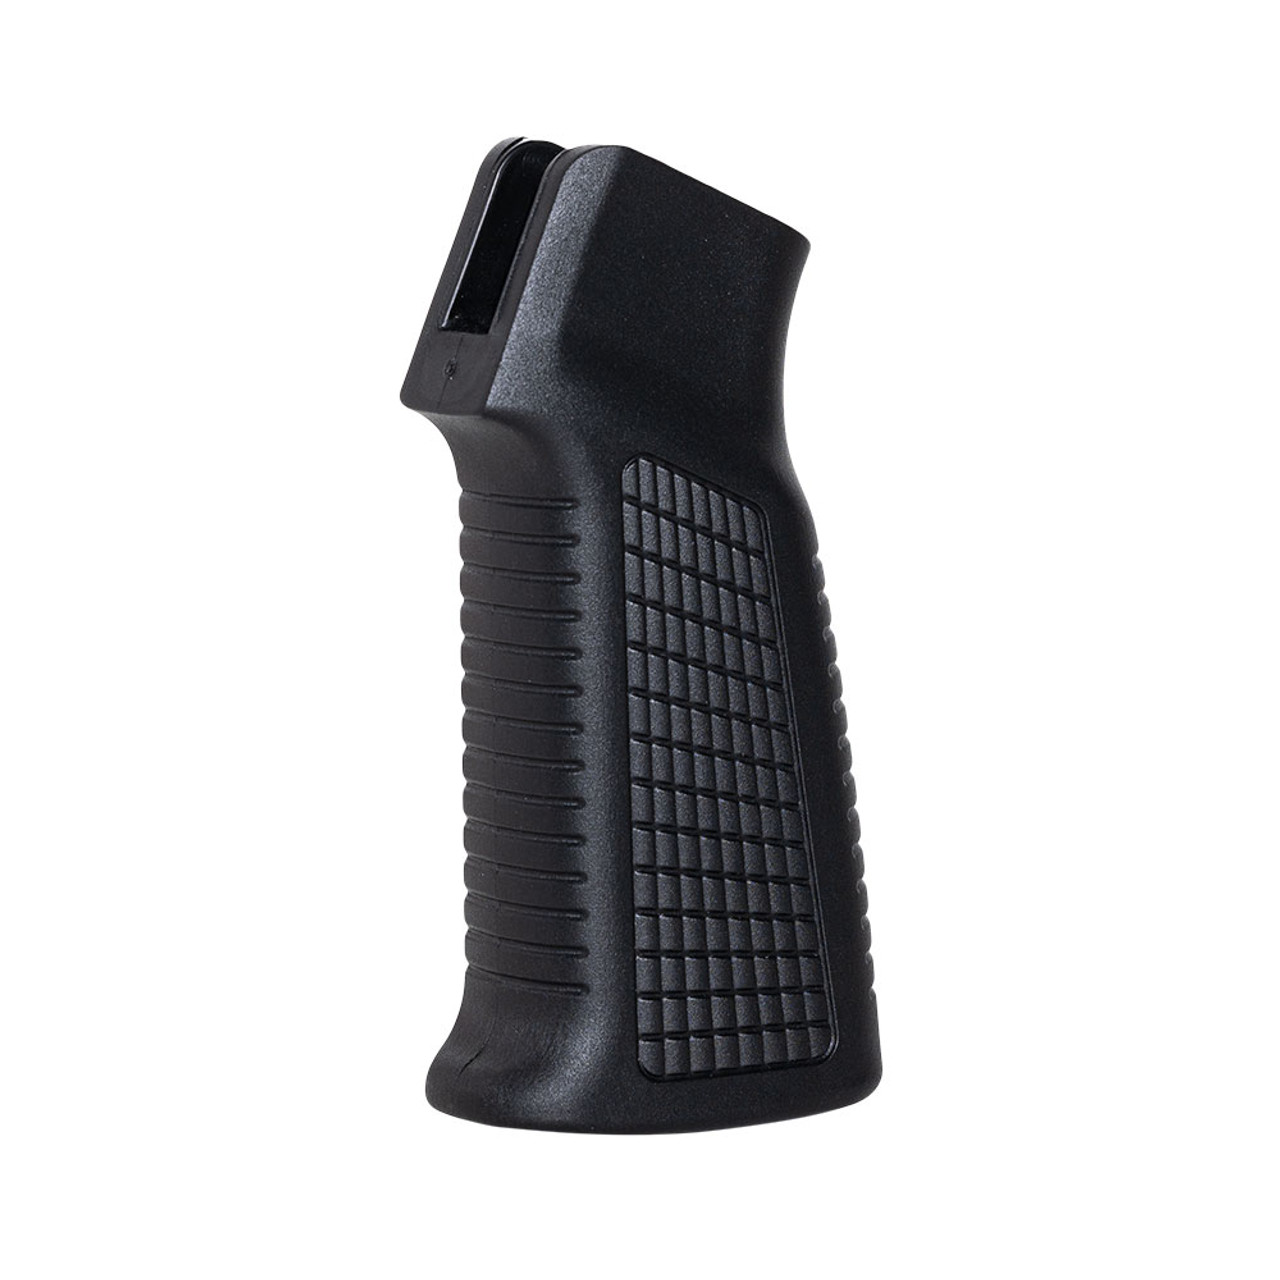 NcSTAR Standard AR-15 Pistol with Storage Compartment Grip Polymer